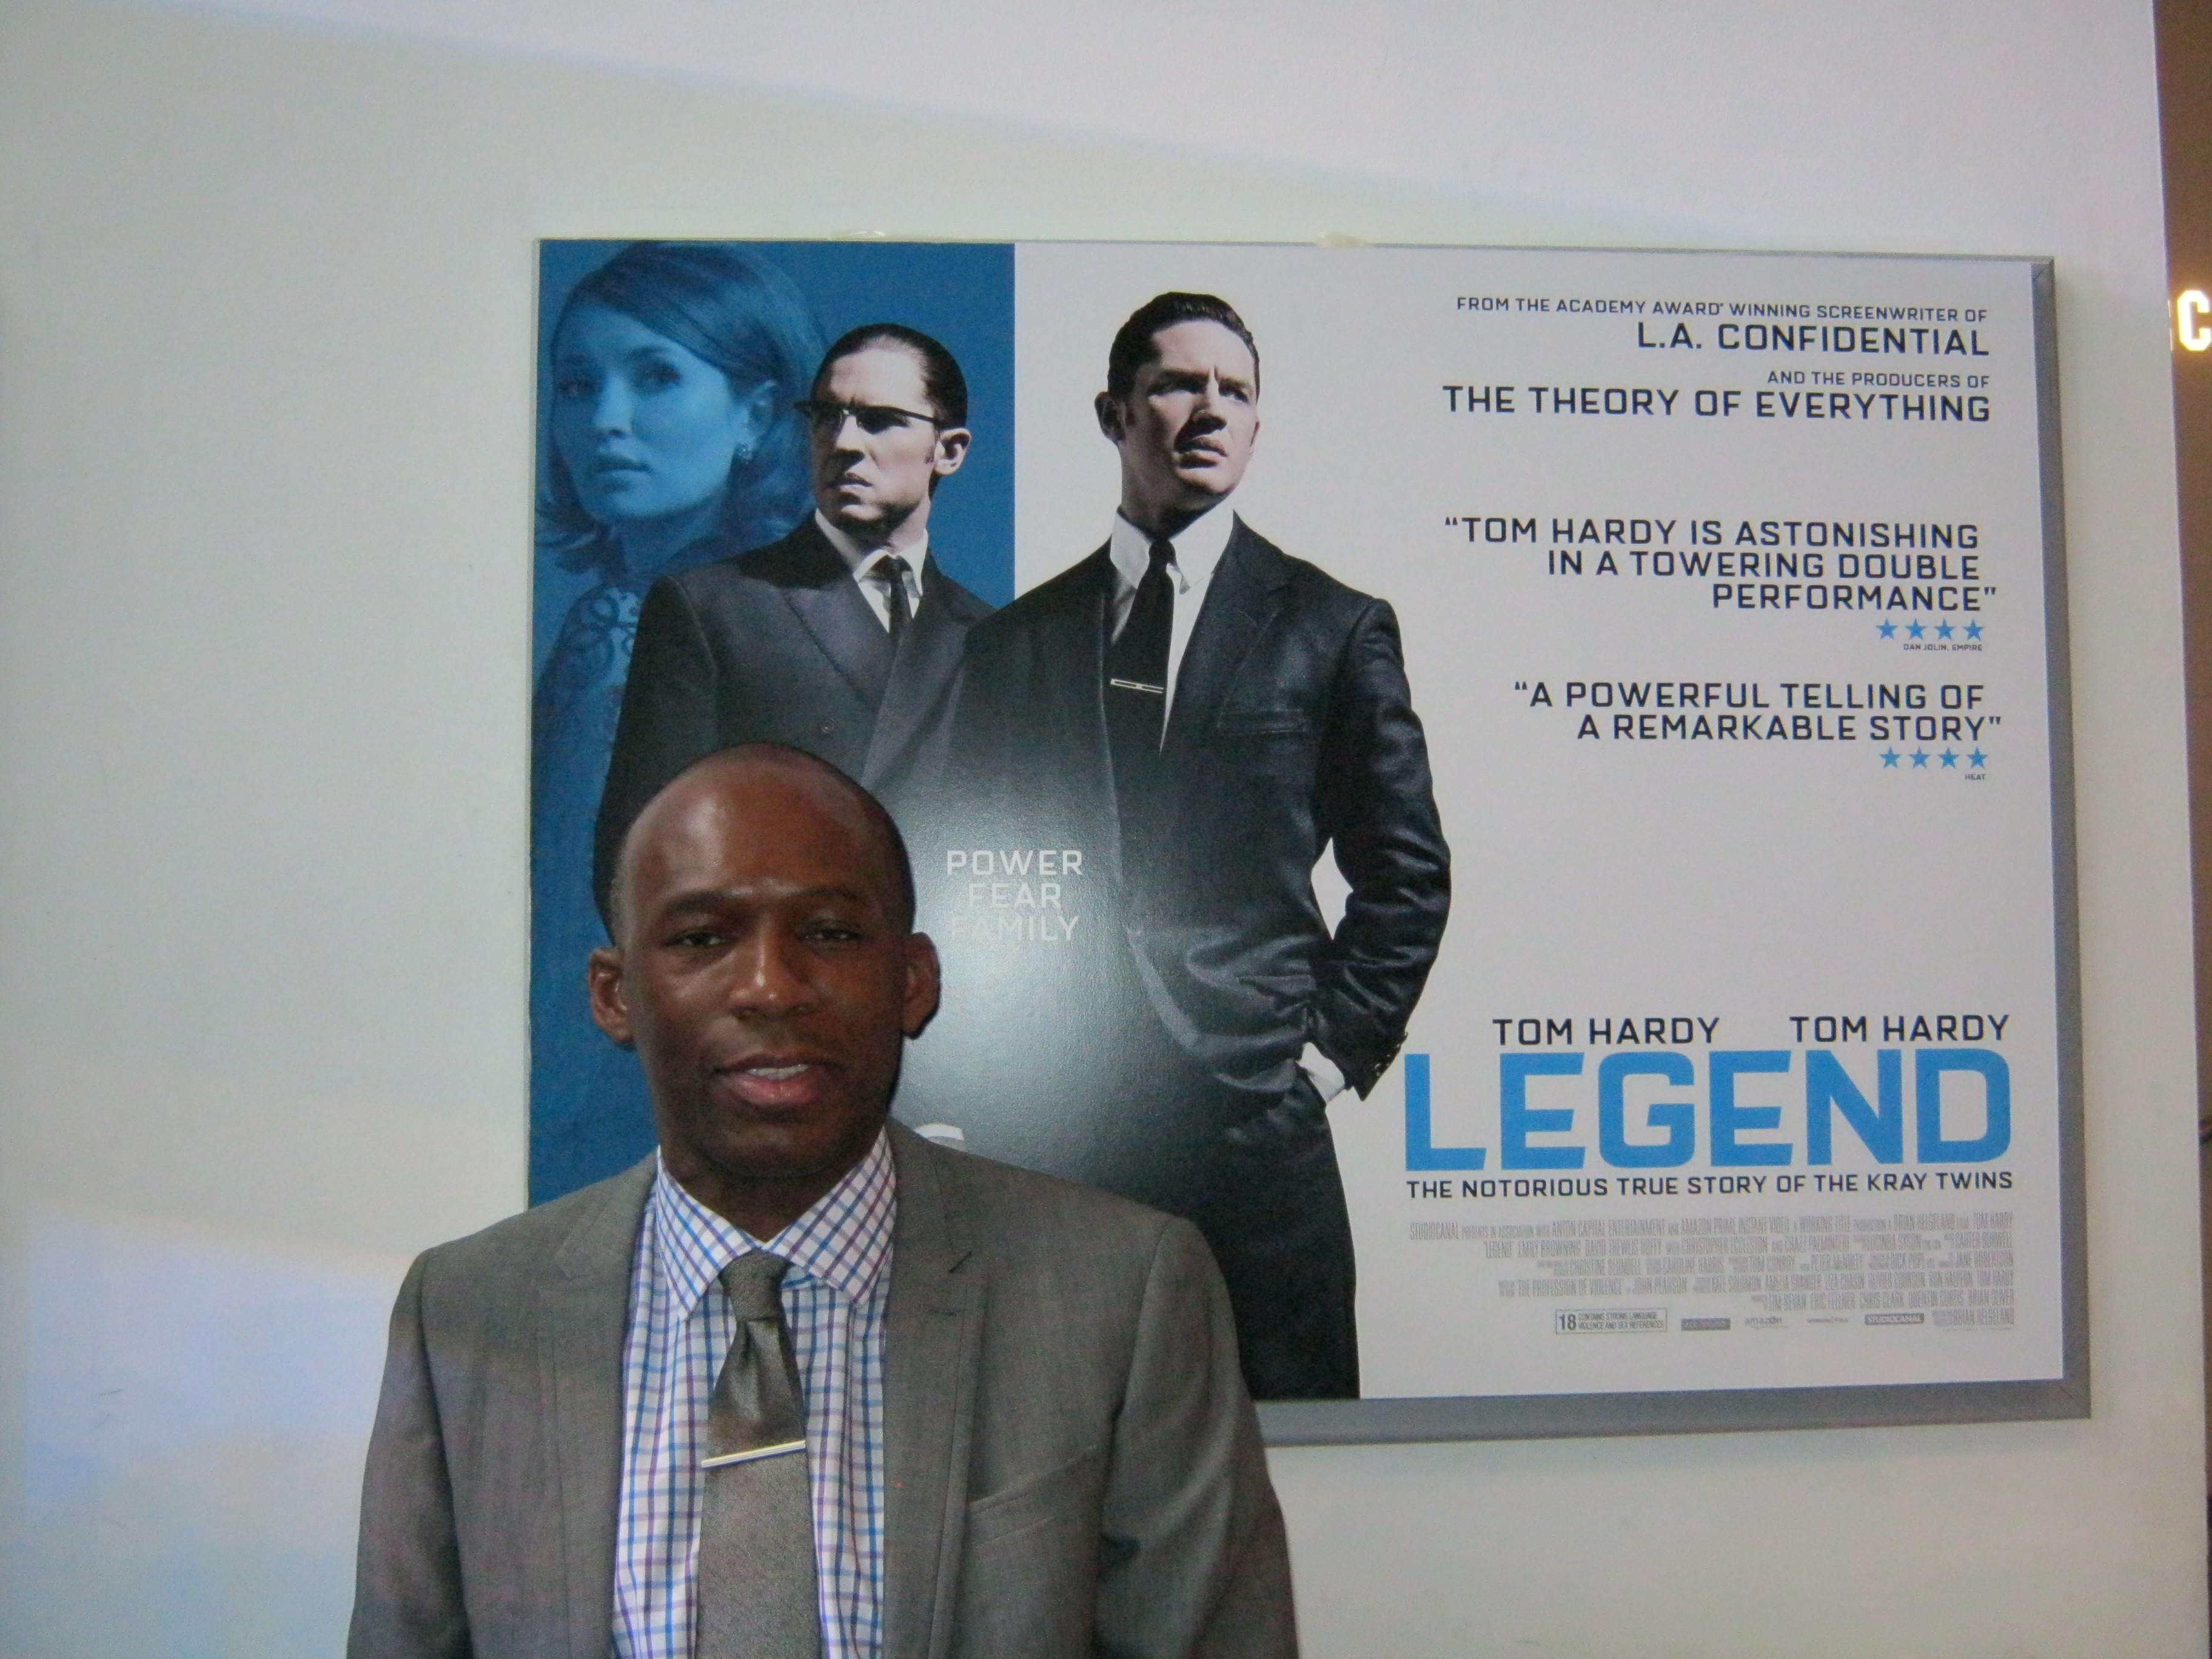 David Olawale Ayinde, at the Premiere of The Film Legend in Odeon Leicester Square, London